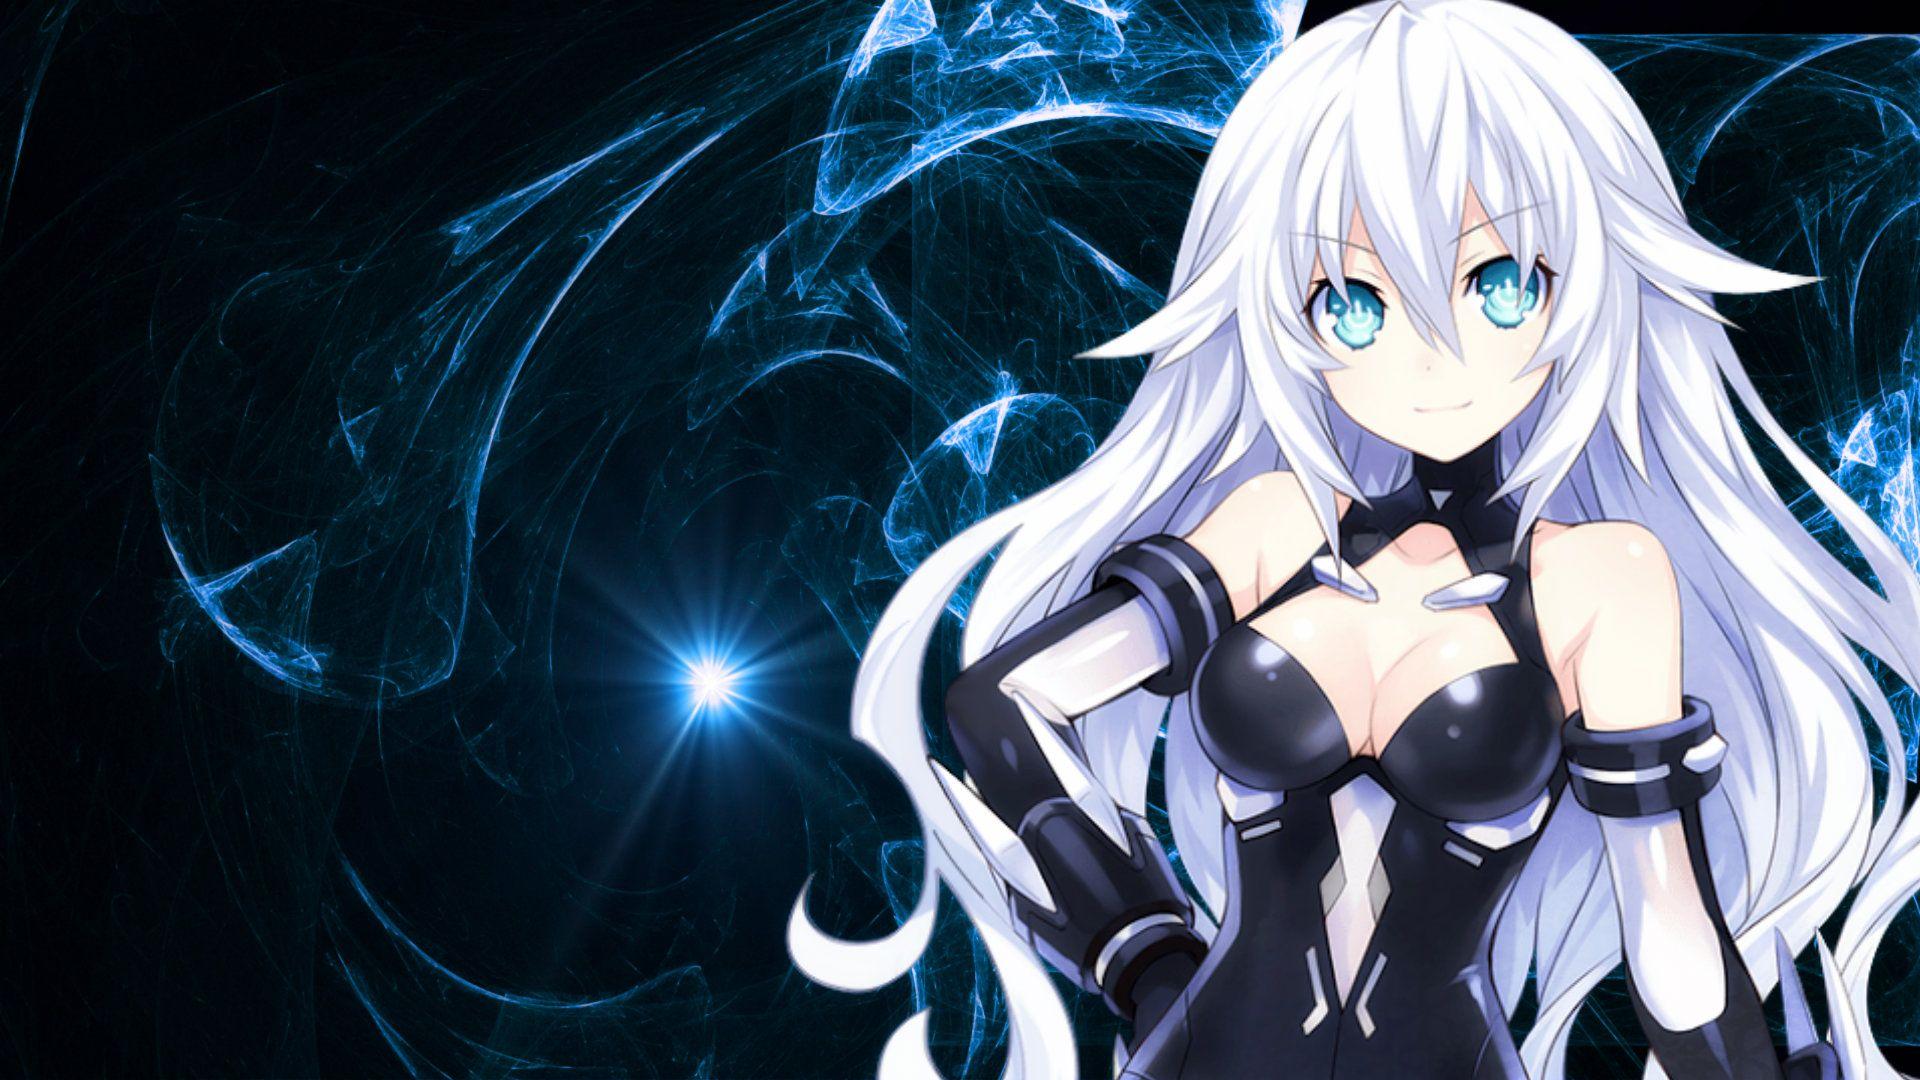 Download high definition quality wallpapers of hyperdimension neptunia hd w...